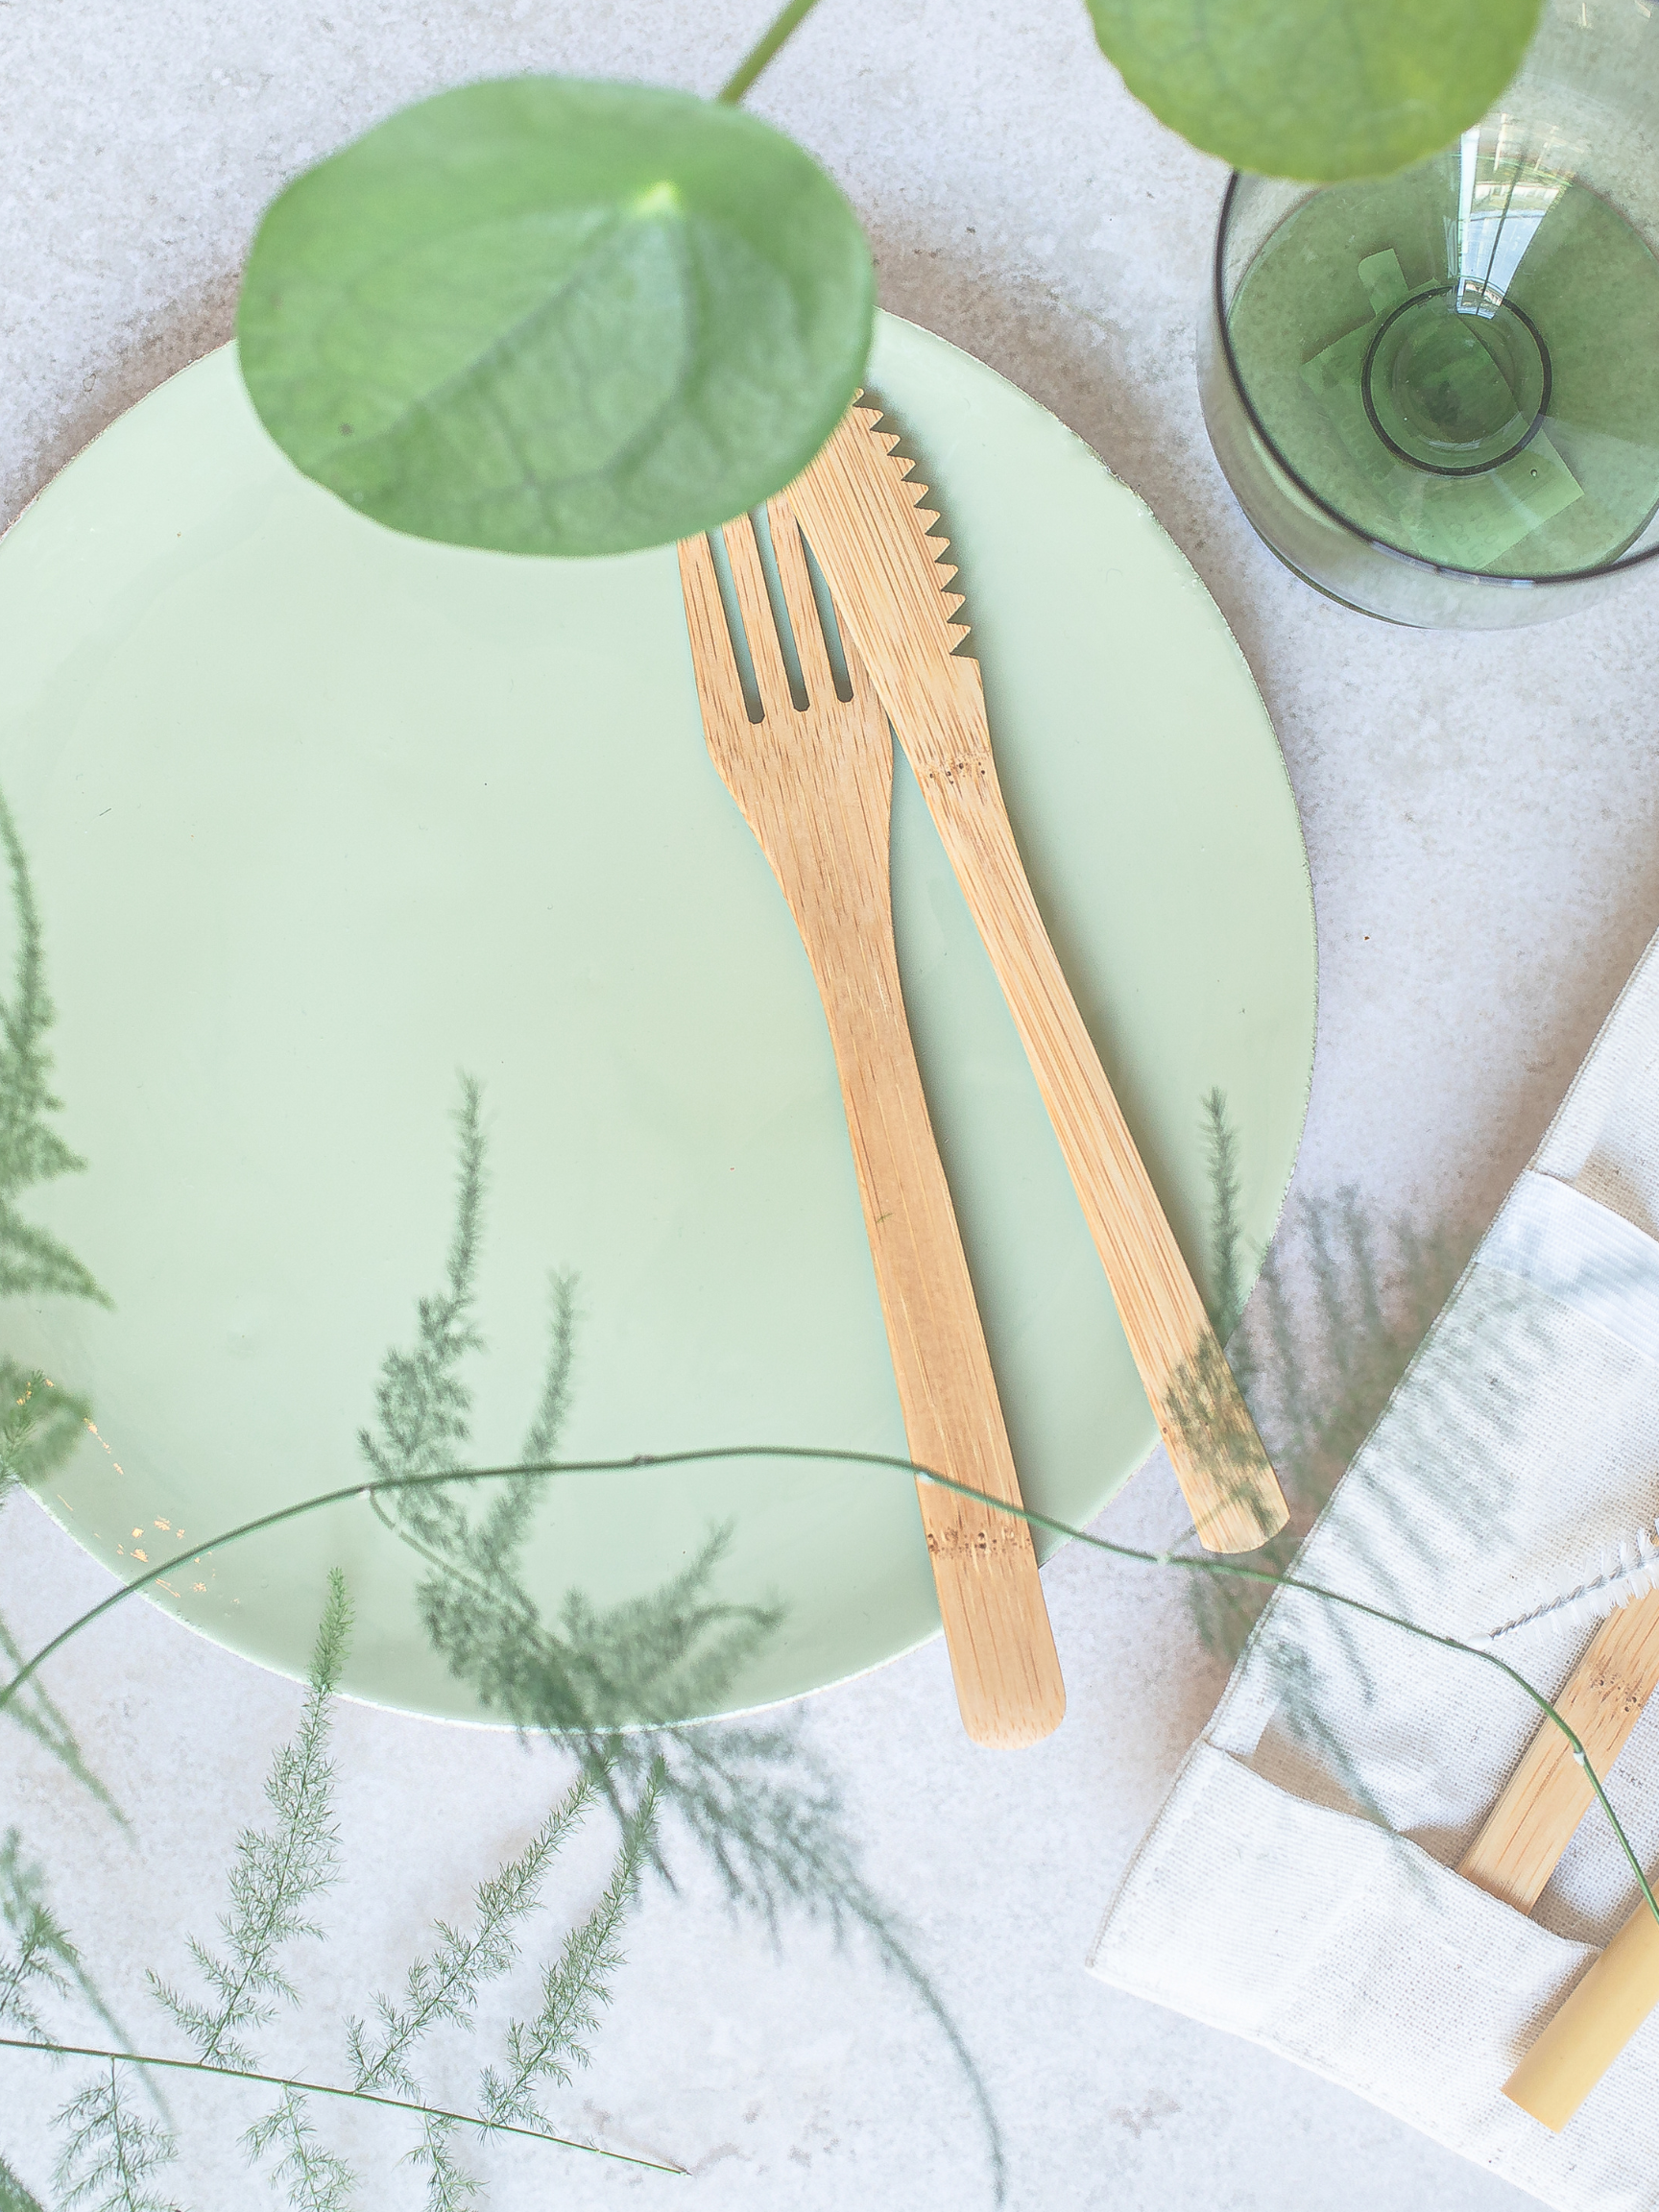 Choose eco-friendly tableware such as bamboo plates and wooden cutler for an Earth-friendly wedding